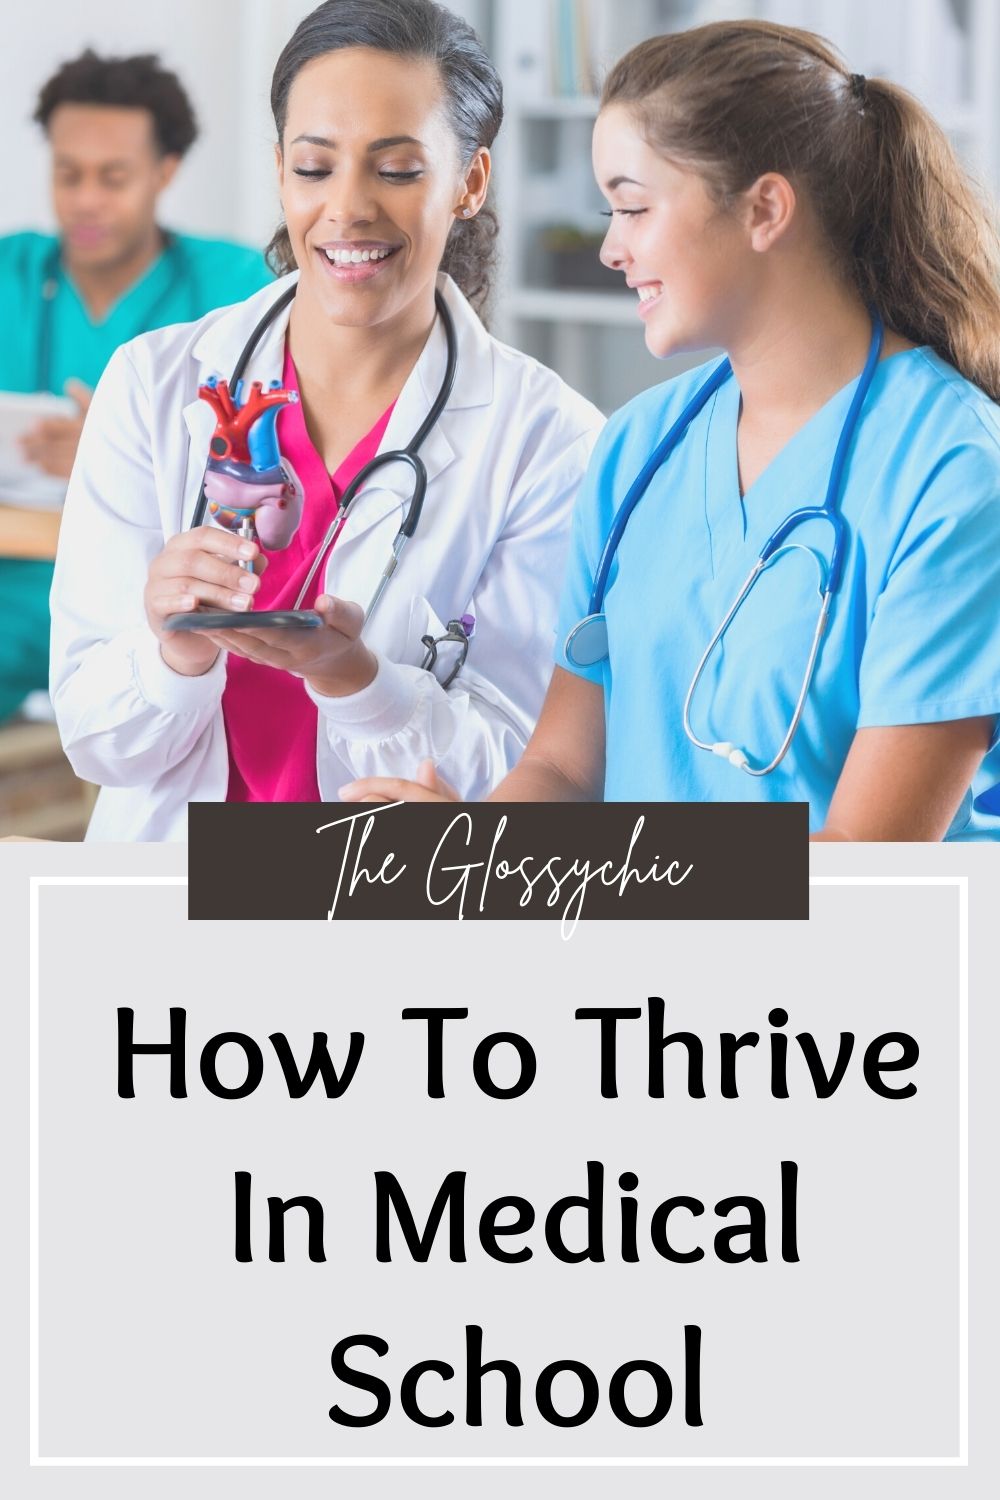 How To Thrive In Medical School